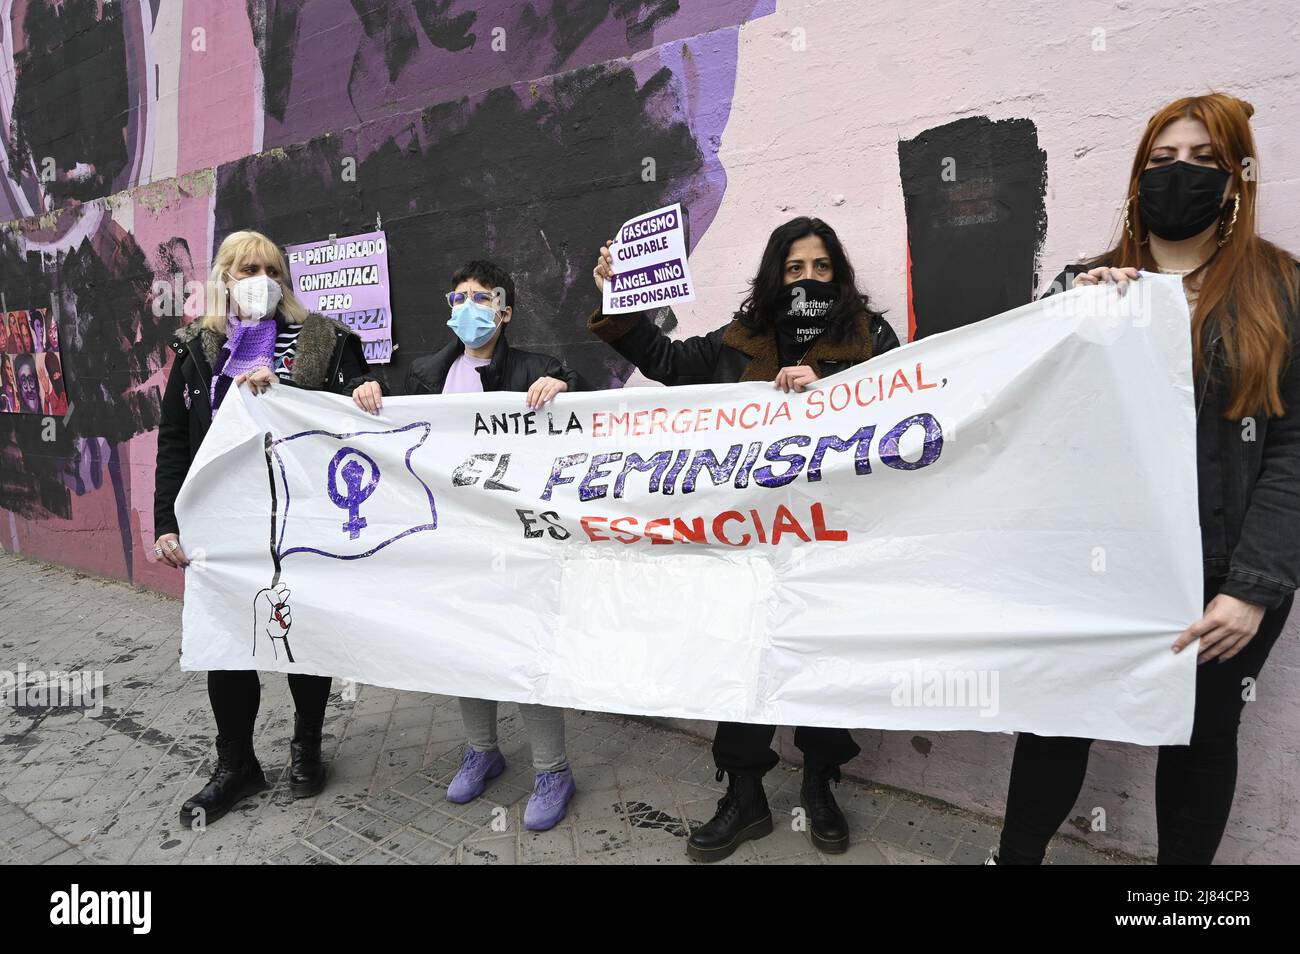 People gather to stage a protest after a feminist mural, depicting icons like Frida Kahlo, Rosa Parks and Nina Simone, vandalized by black spray paint ovenight in Madrid, Spain Featuring: Atmosphere Where: Madrid, Spain When: 08 Mar 2021 Credit: Oscar Gonzalez/WENN Stock Photo